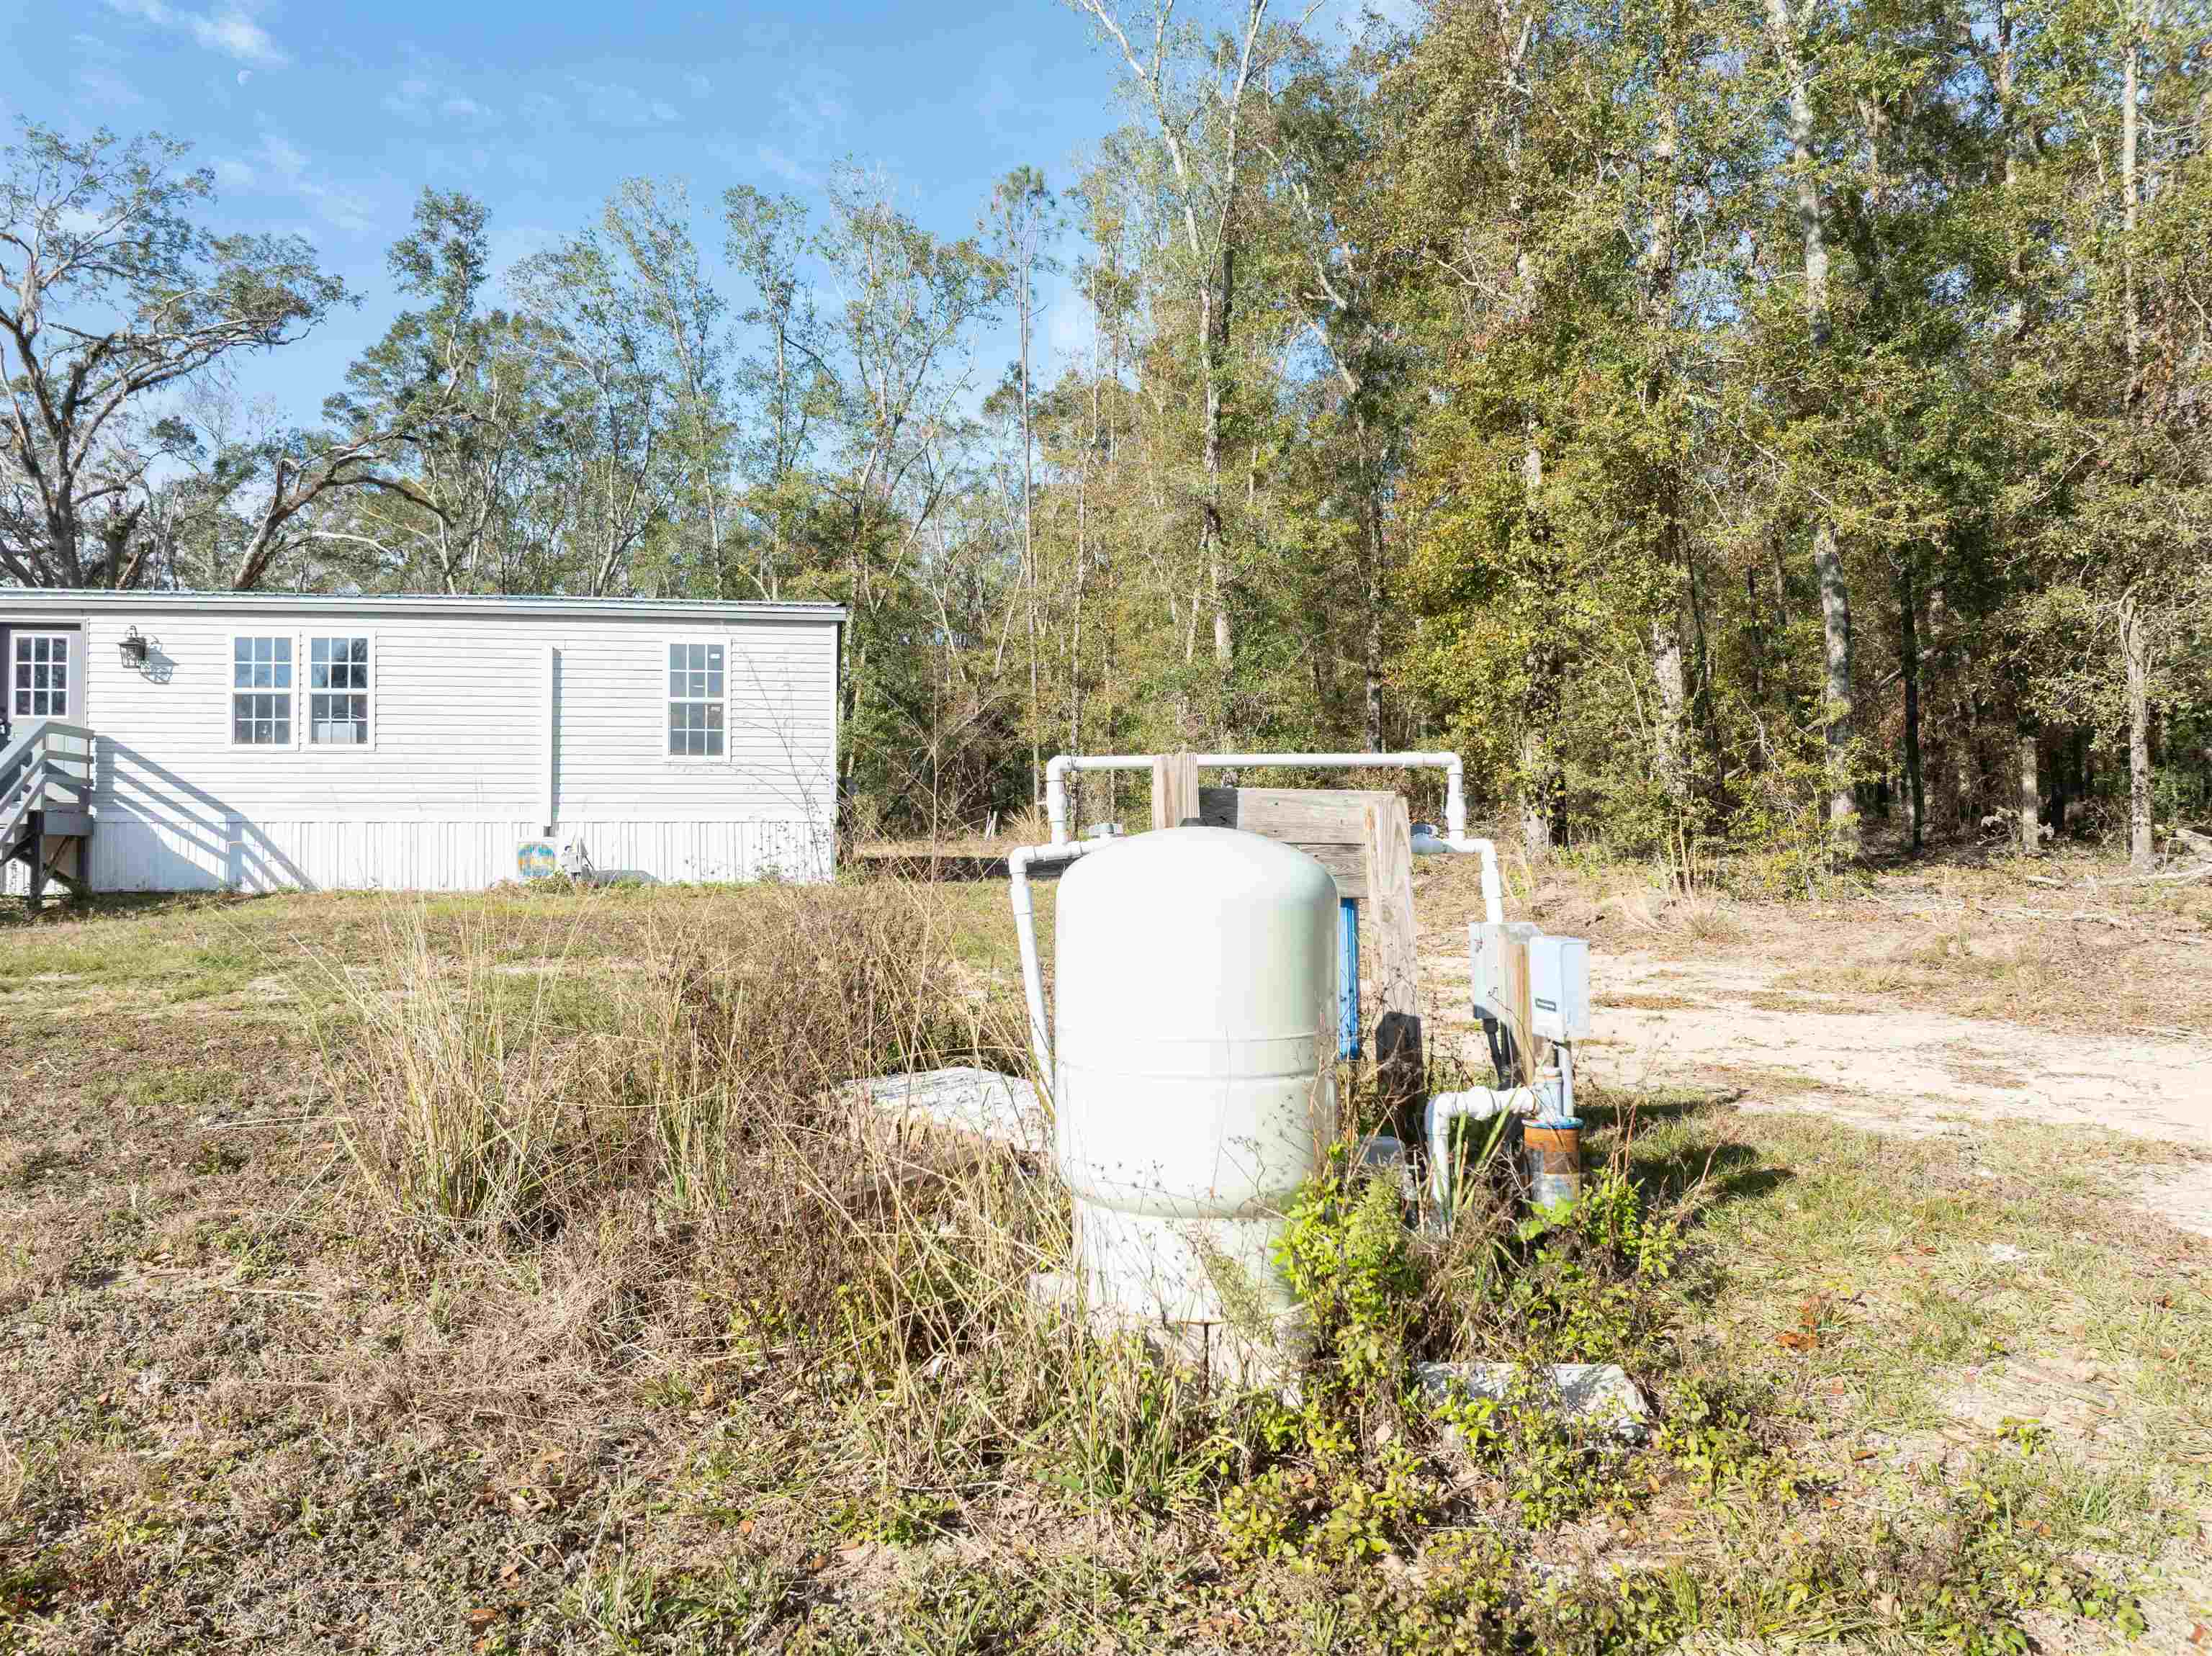 4281 NW 40th Ave.,JENNINGS,Florida 32053,3 Bedrooms Bedrooms,2 BathroomsBathrooms,Manuf/mobile home,4281 NW 40th Ave.,368980